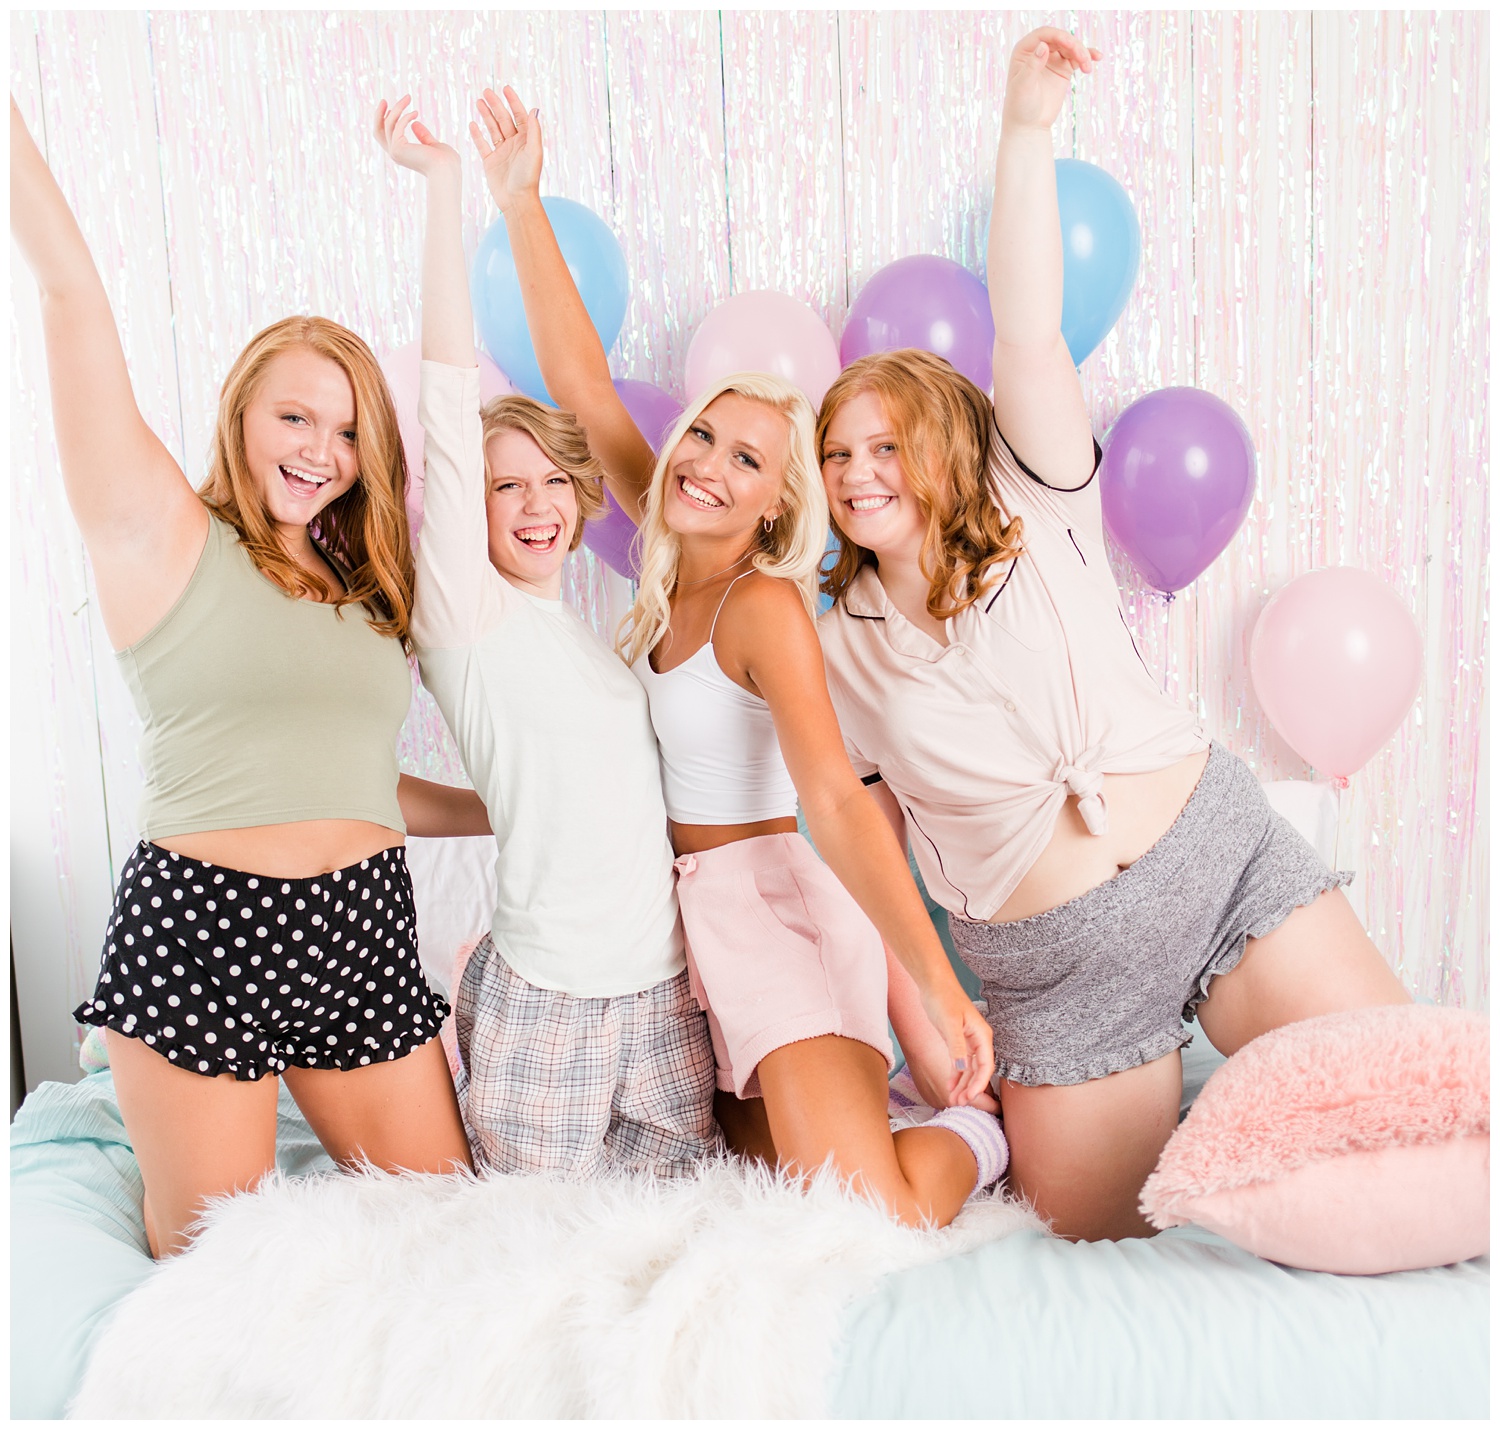 Senior girls laughing during a senior sleepover-styled photoshoot with iridescent streamers and balloons. | CB Studio